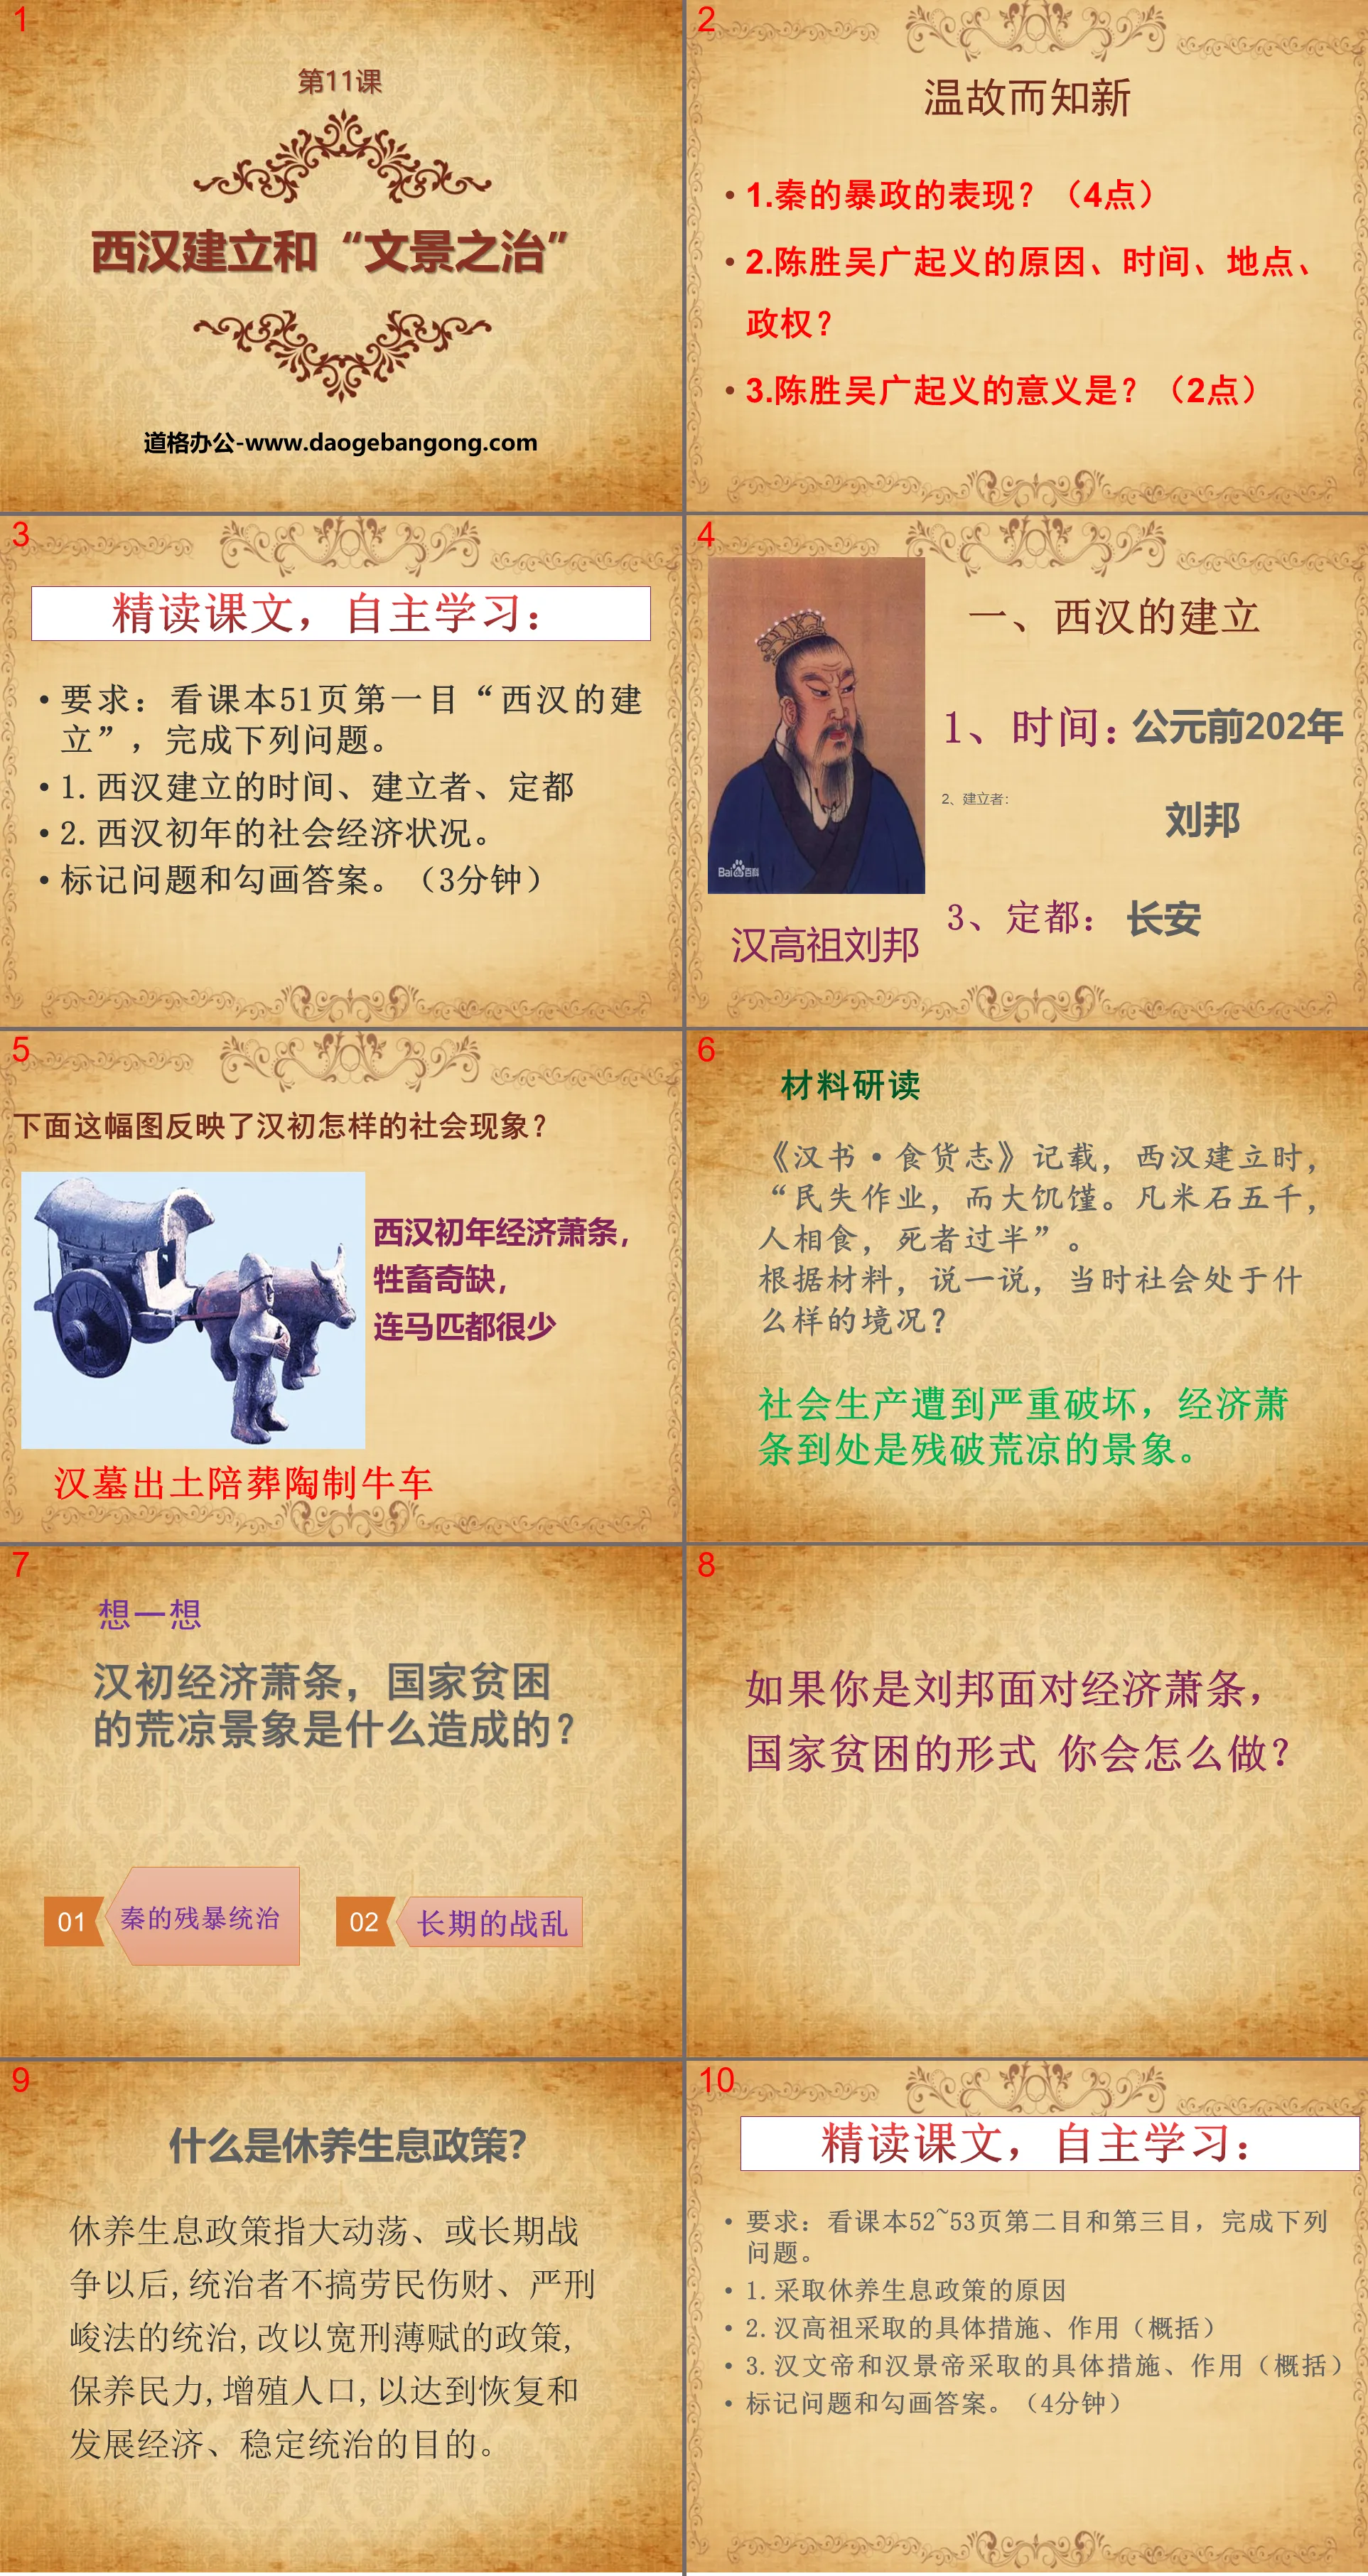 "The Establishment of the Western Han Dynasty and the "Government of Wenjing"" PPT courseware